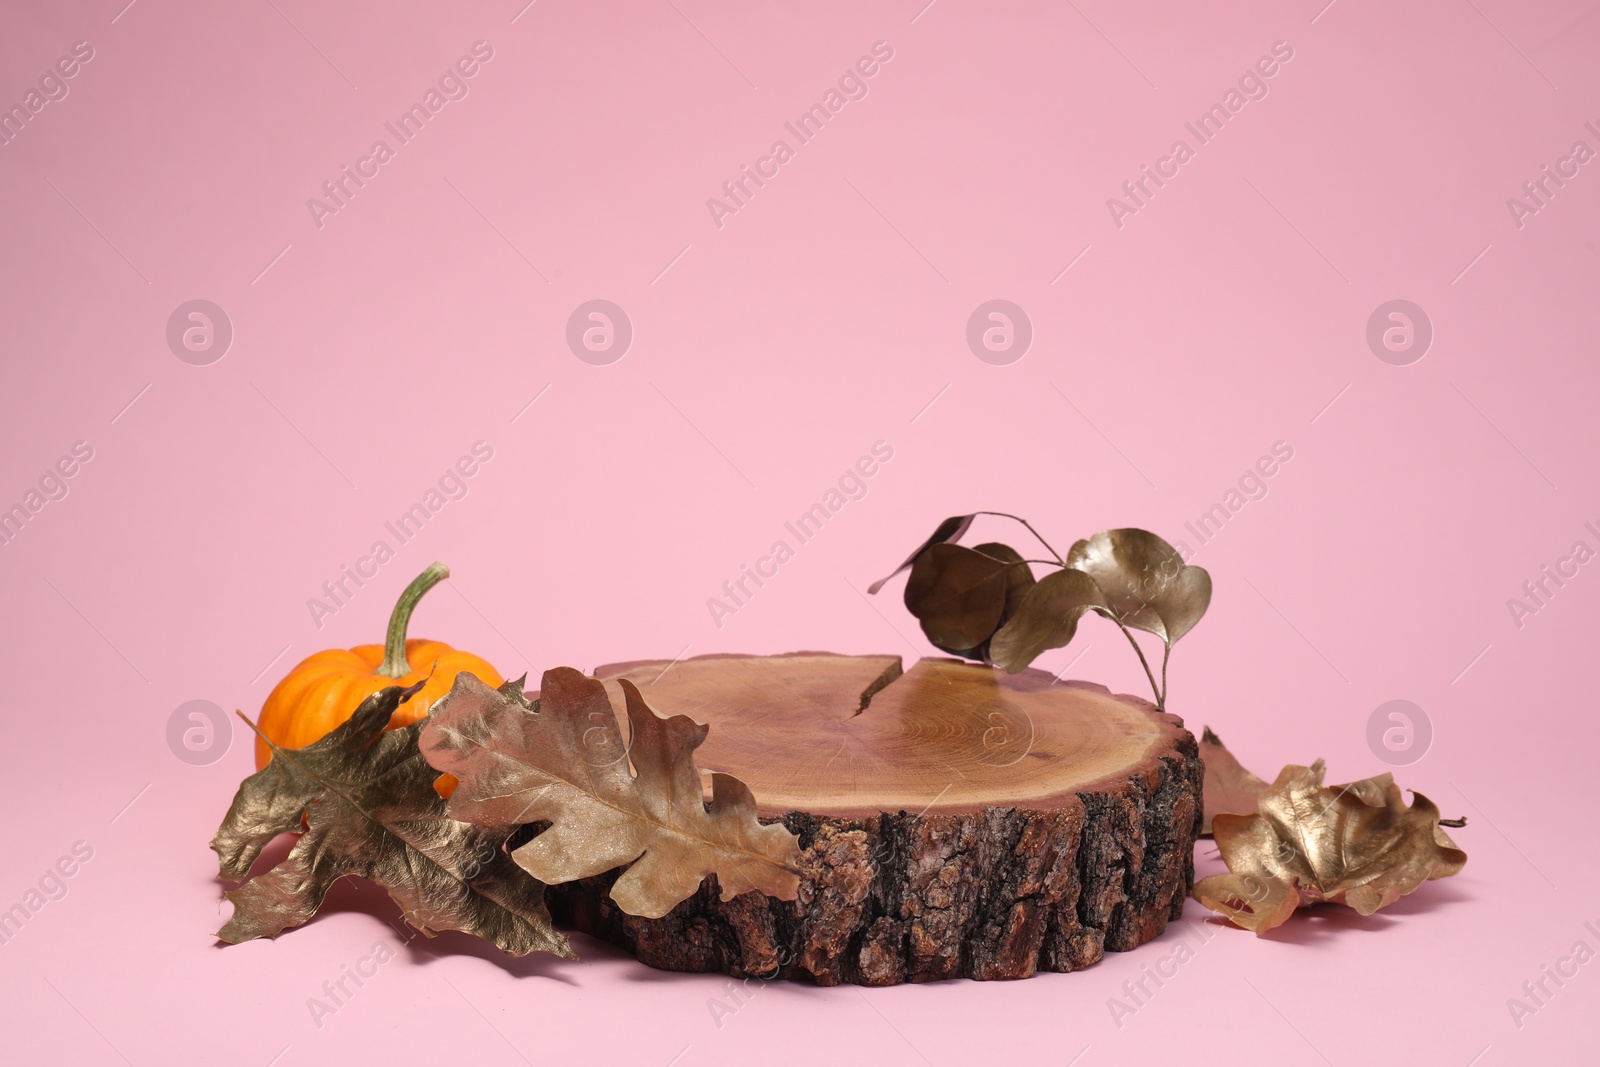 Photo of Autumn presentation for product. Wooden stump, pumpkin and golden leaves on pink background